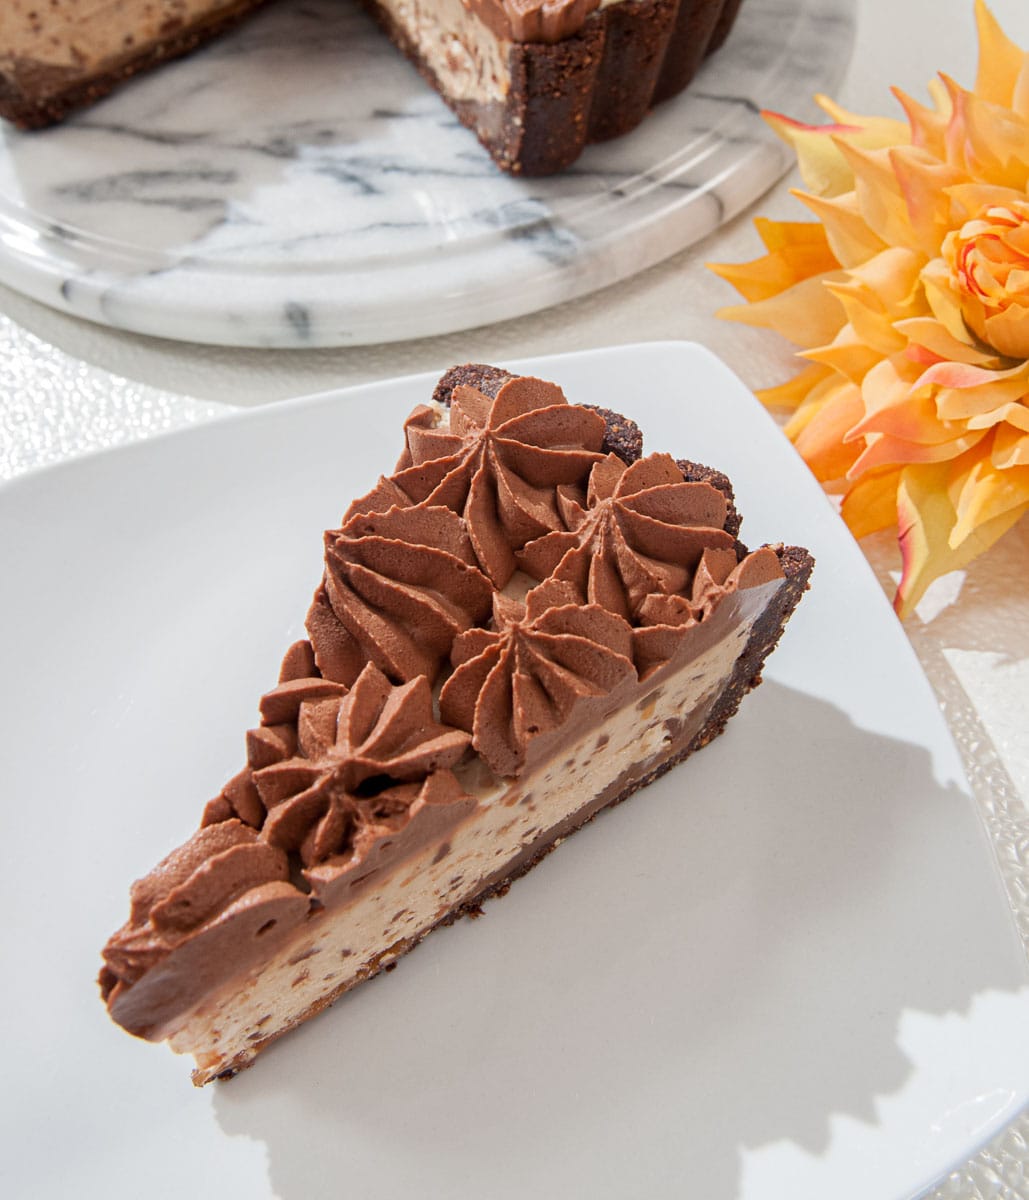 An overhead view of a slice of Snickers Pie on a plate.